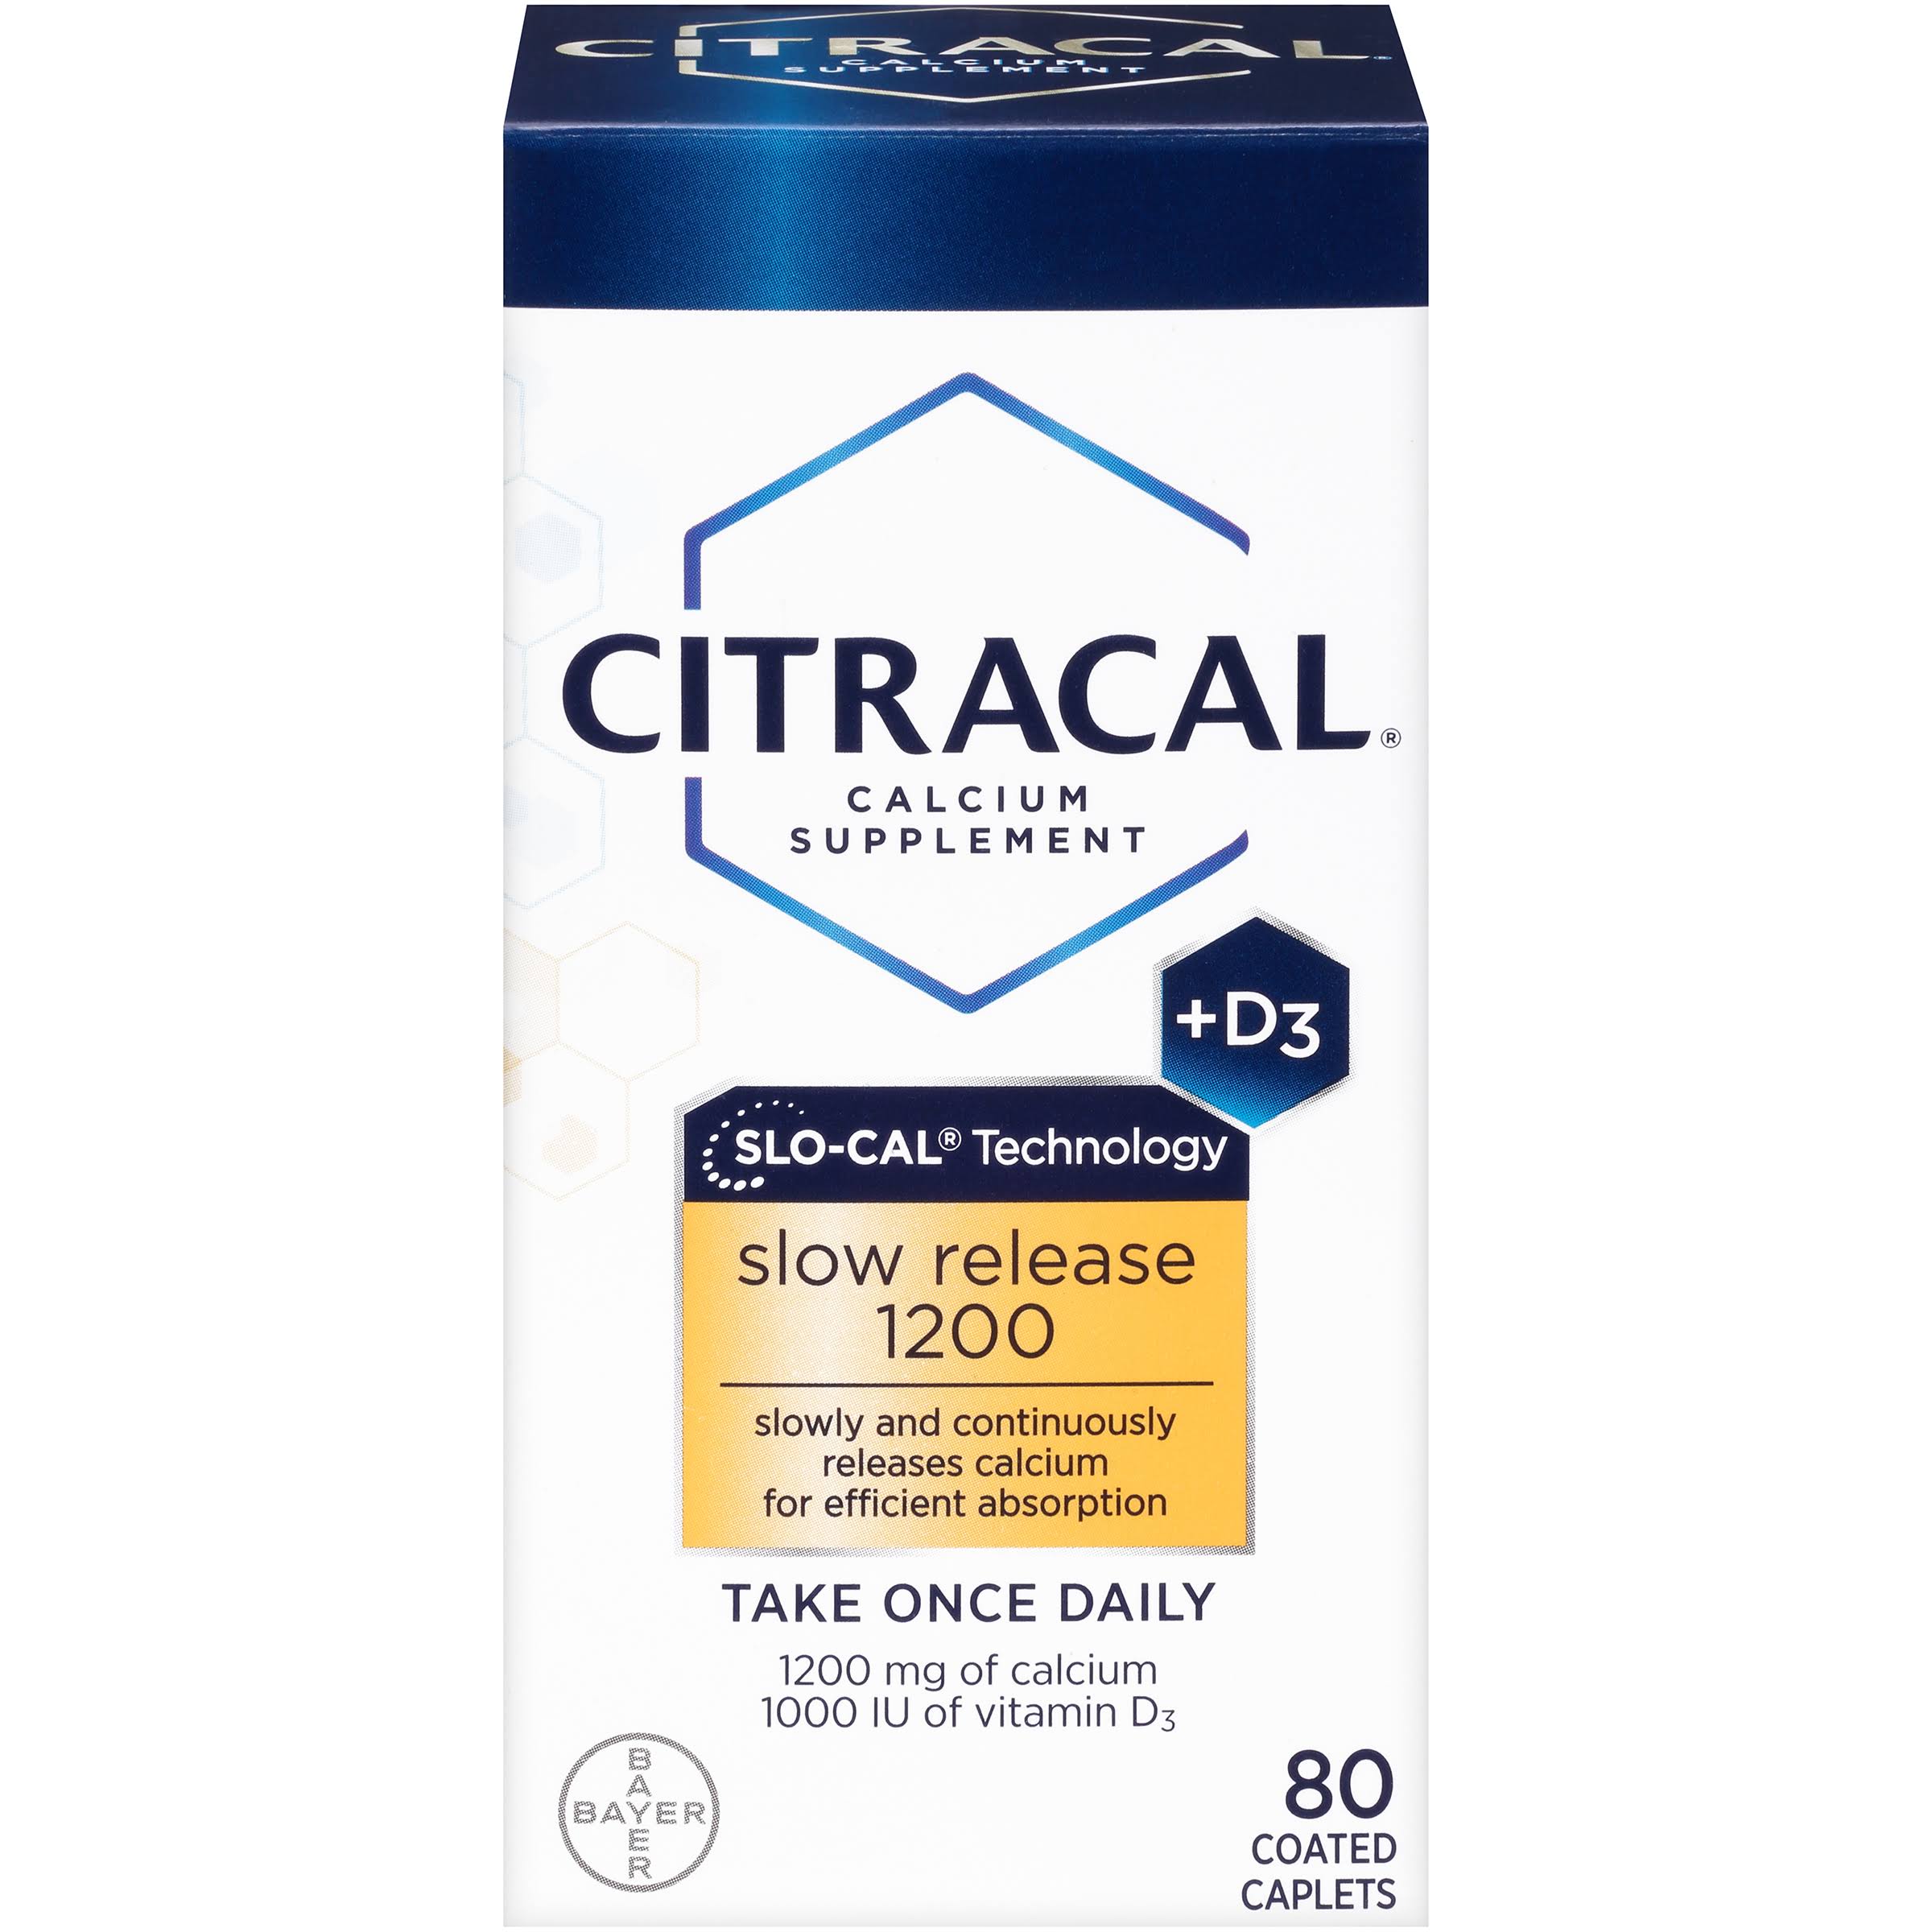 Citracal Calcium Supplement Slow Release 1200 D3 Vitamins - 80 Coated Tablets